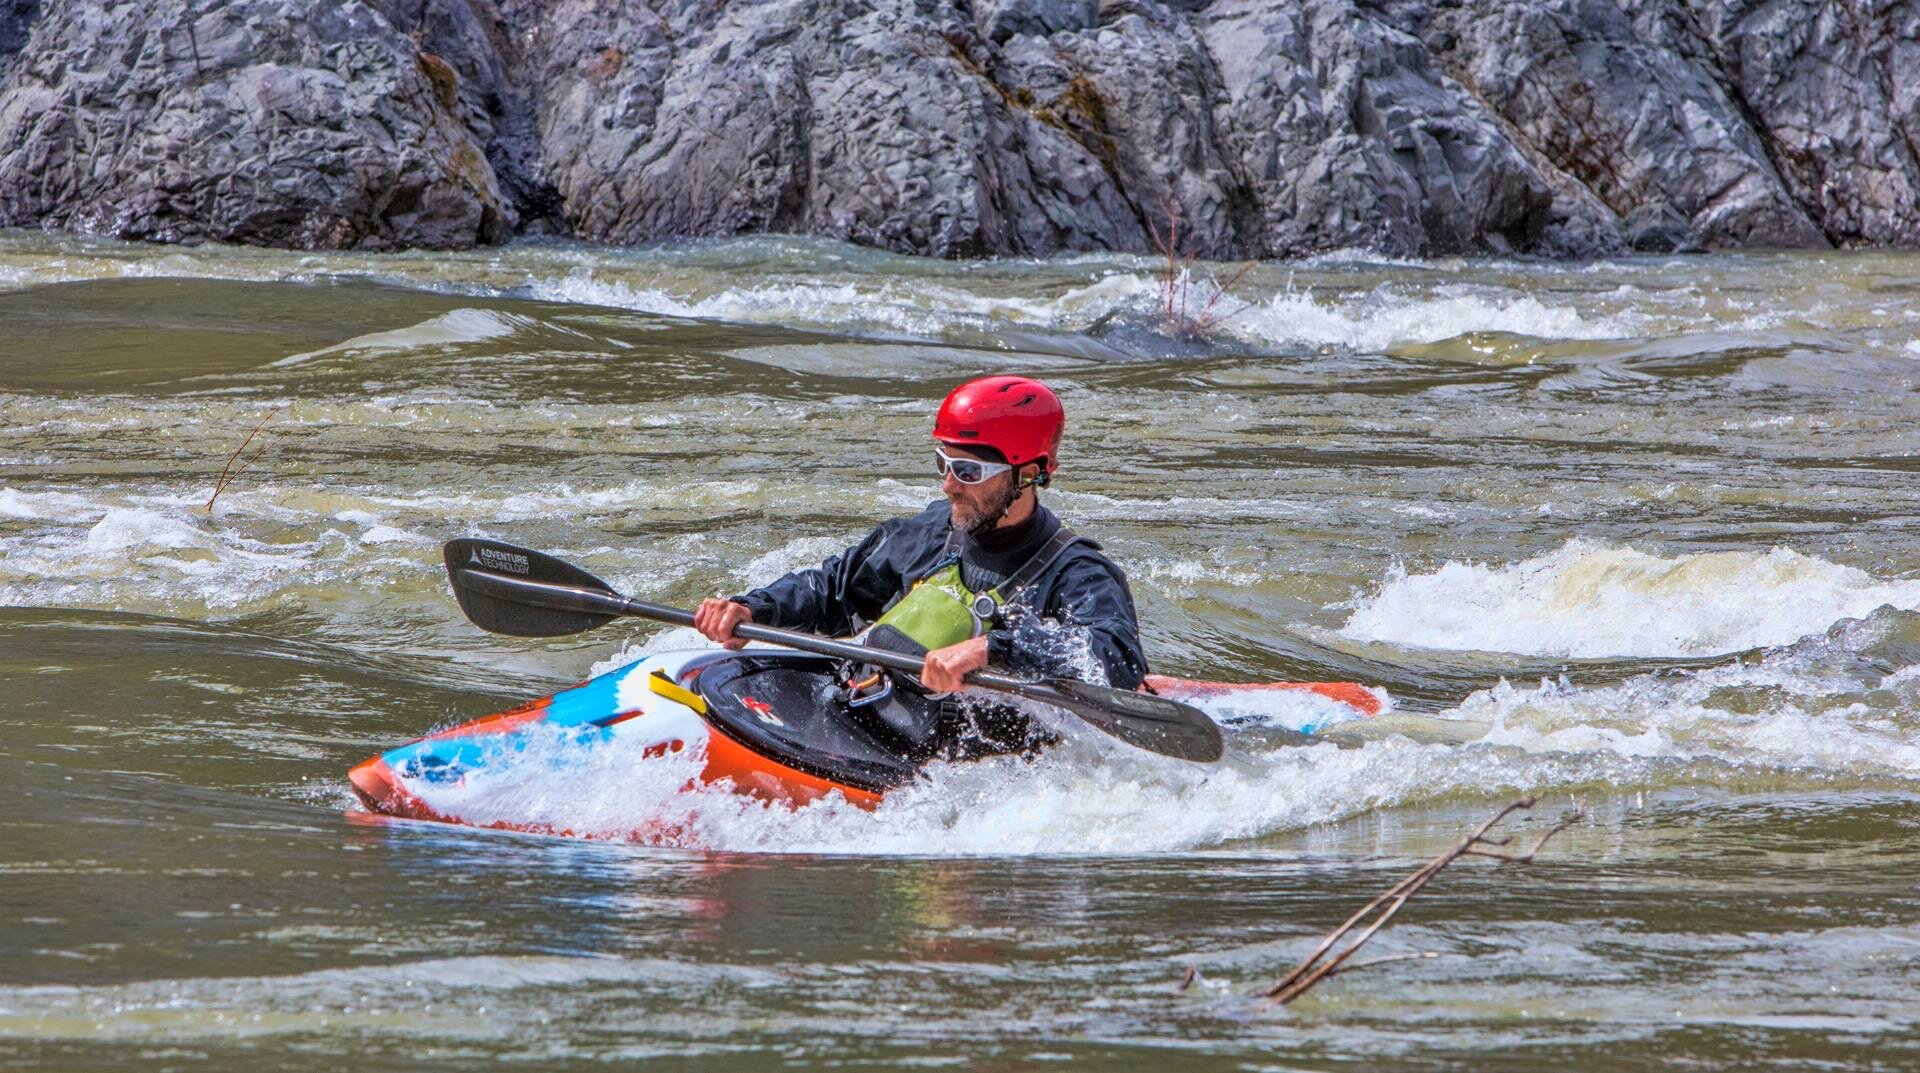 Jeff surfing it up on the Eel River